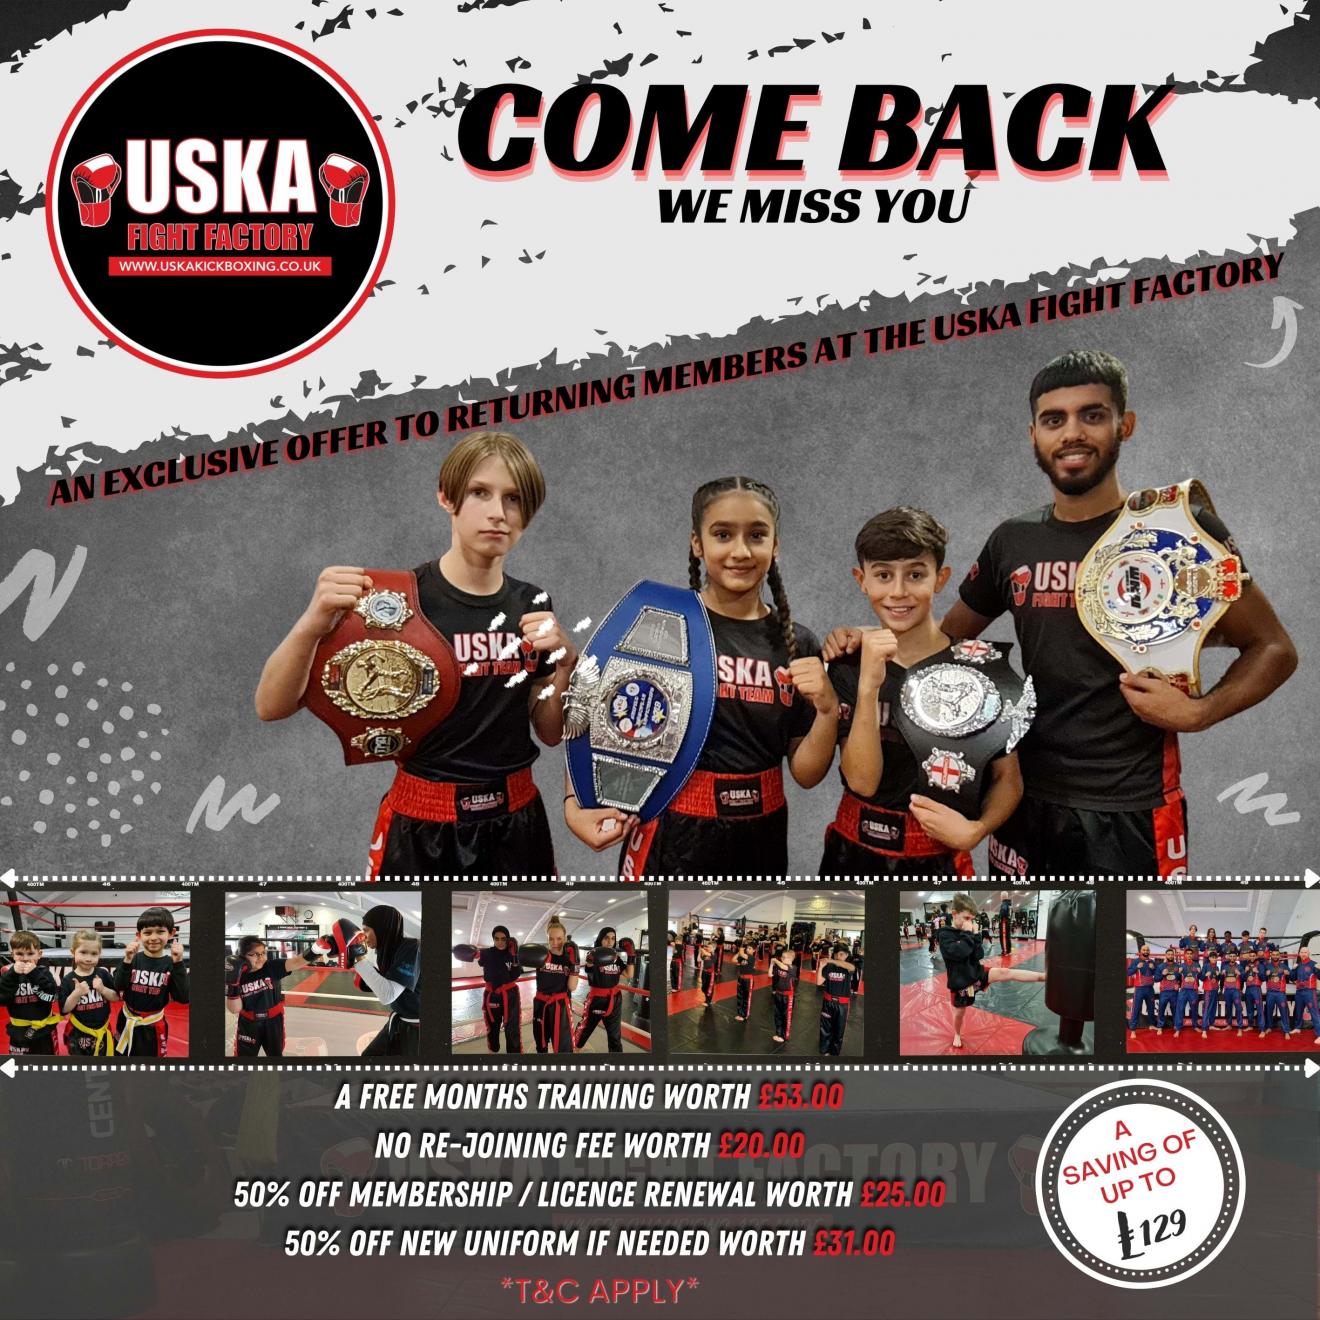 28-12-22 - Exclusive Offer to returning USKA members!